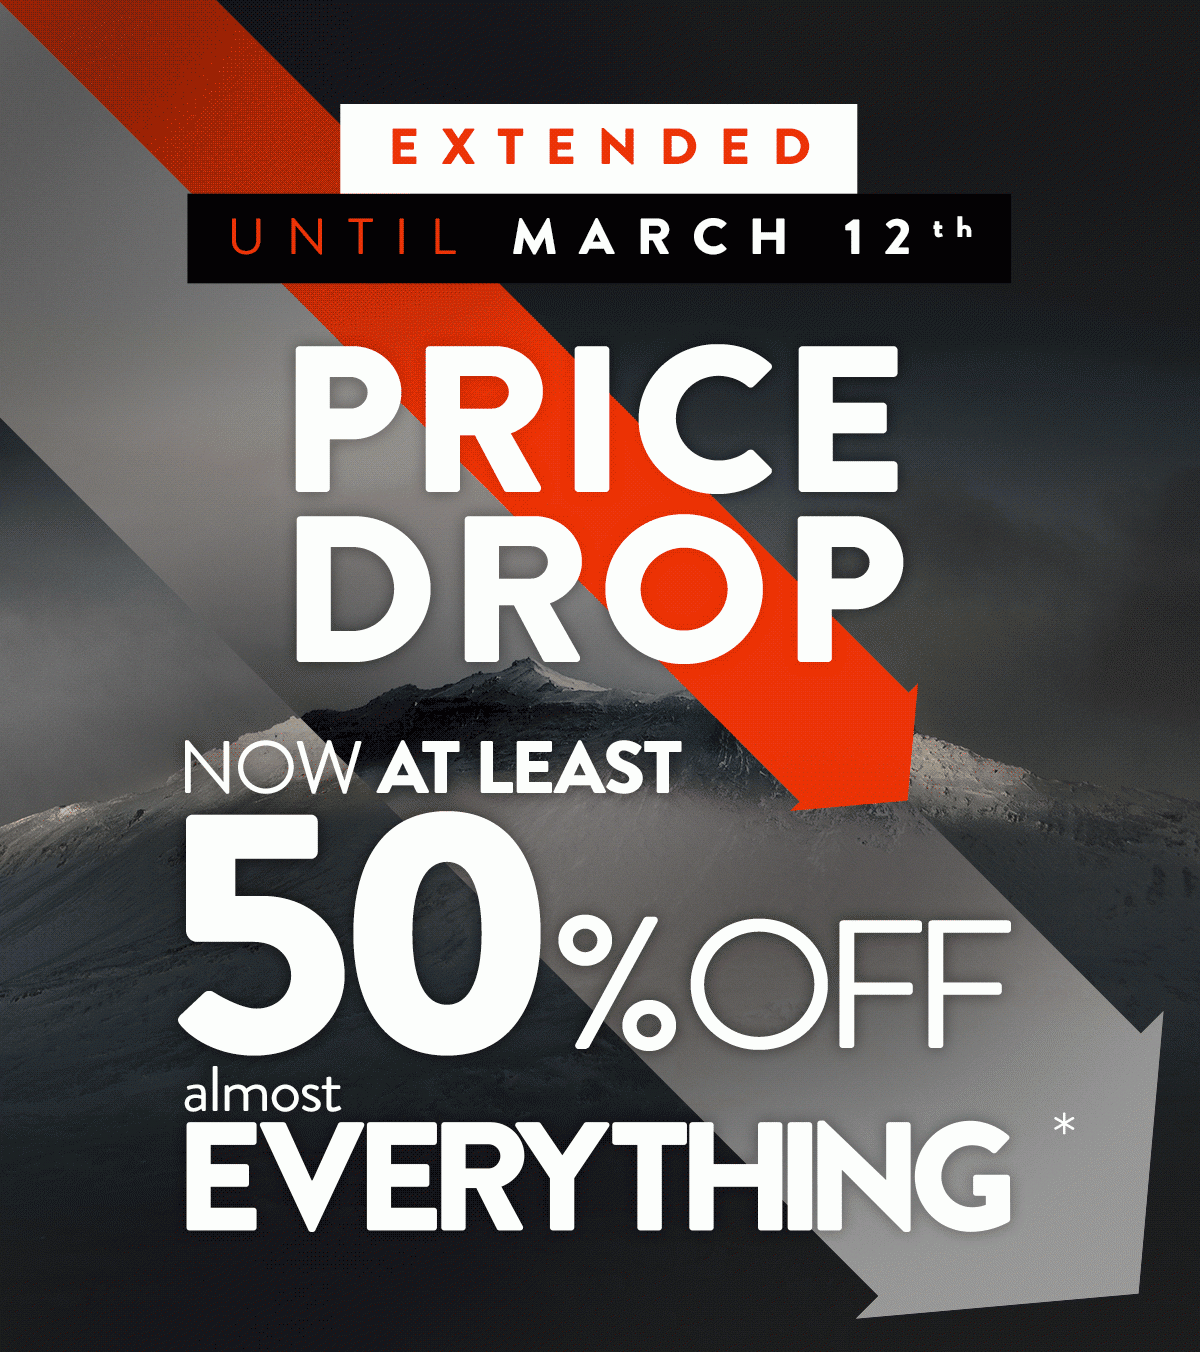 3 DAYS ONLY - PRICE DROP NOW AT LEAST 50% OFF ALMOST EVERYTHING